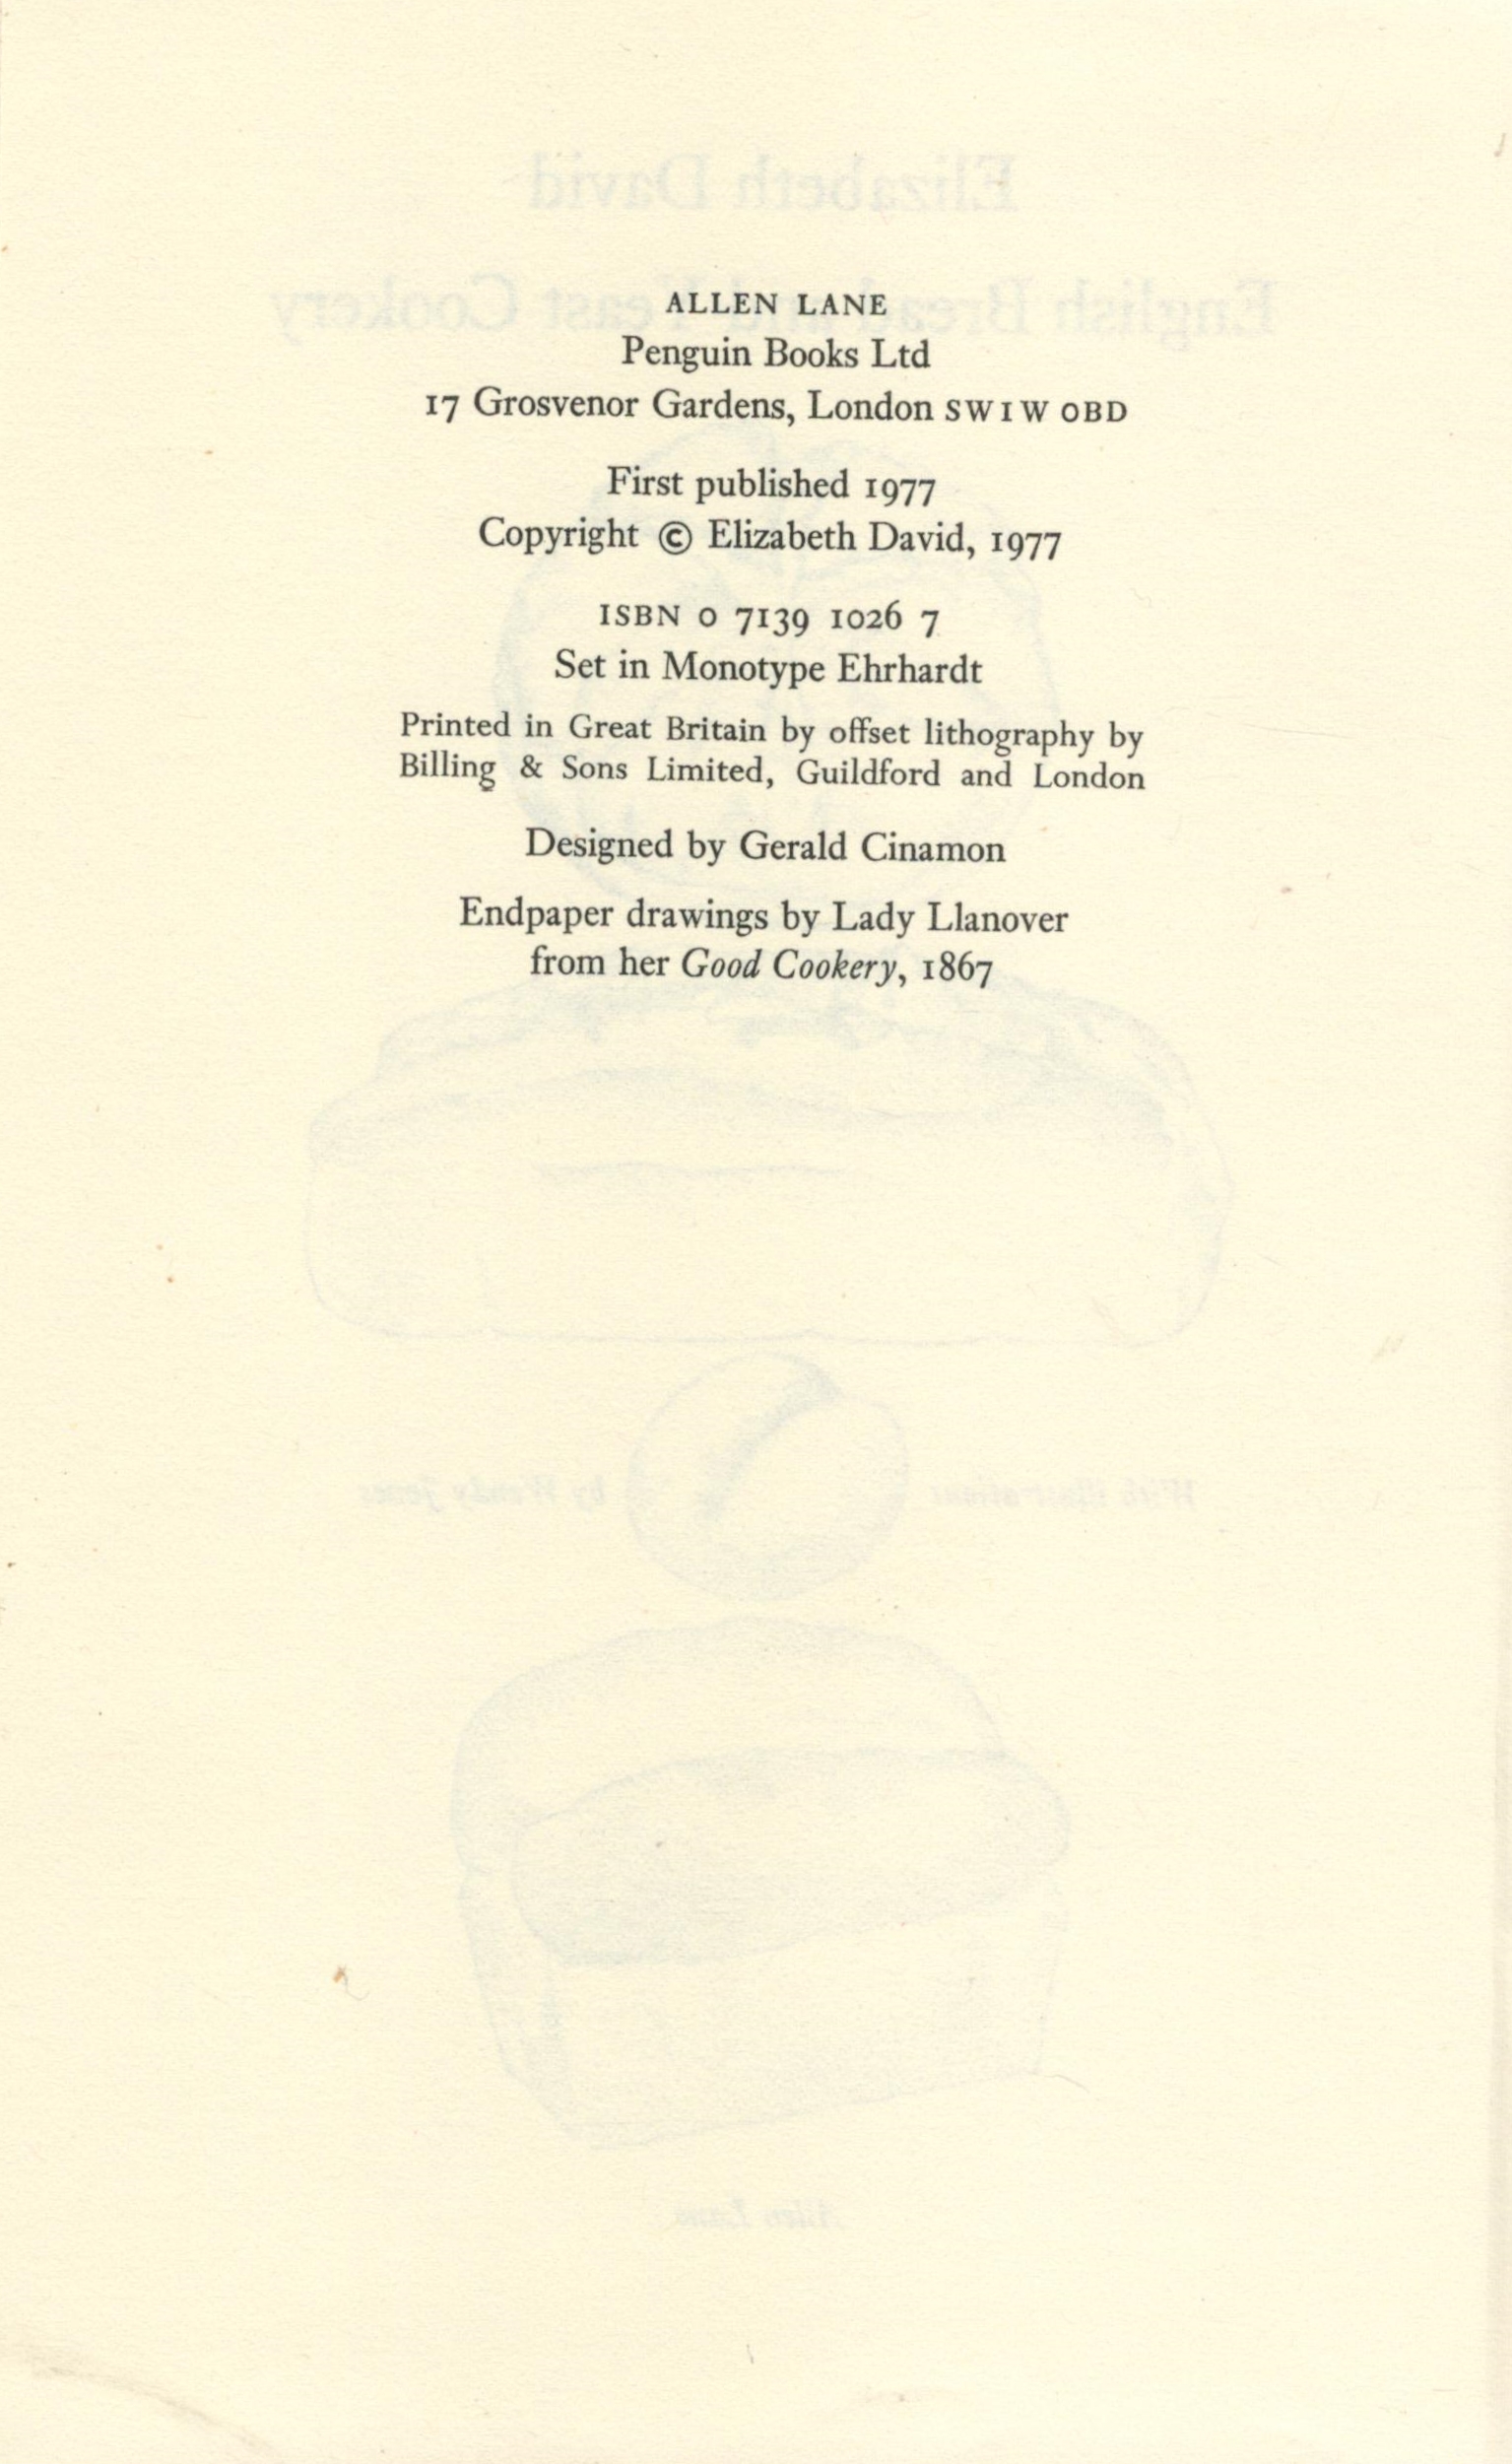 English Bread and Yeast Cookery by Elizabeth David Hardback Book 1977 First Edition published by - Image 3 of 3